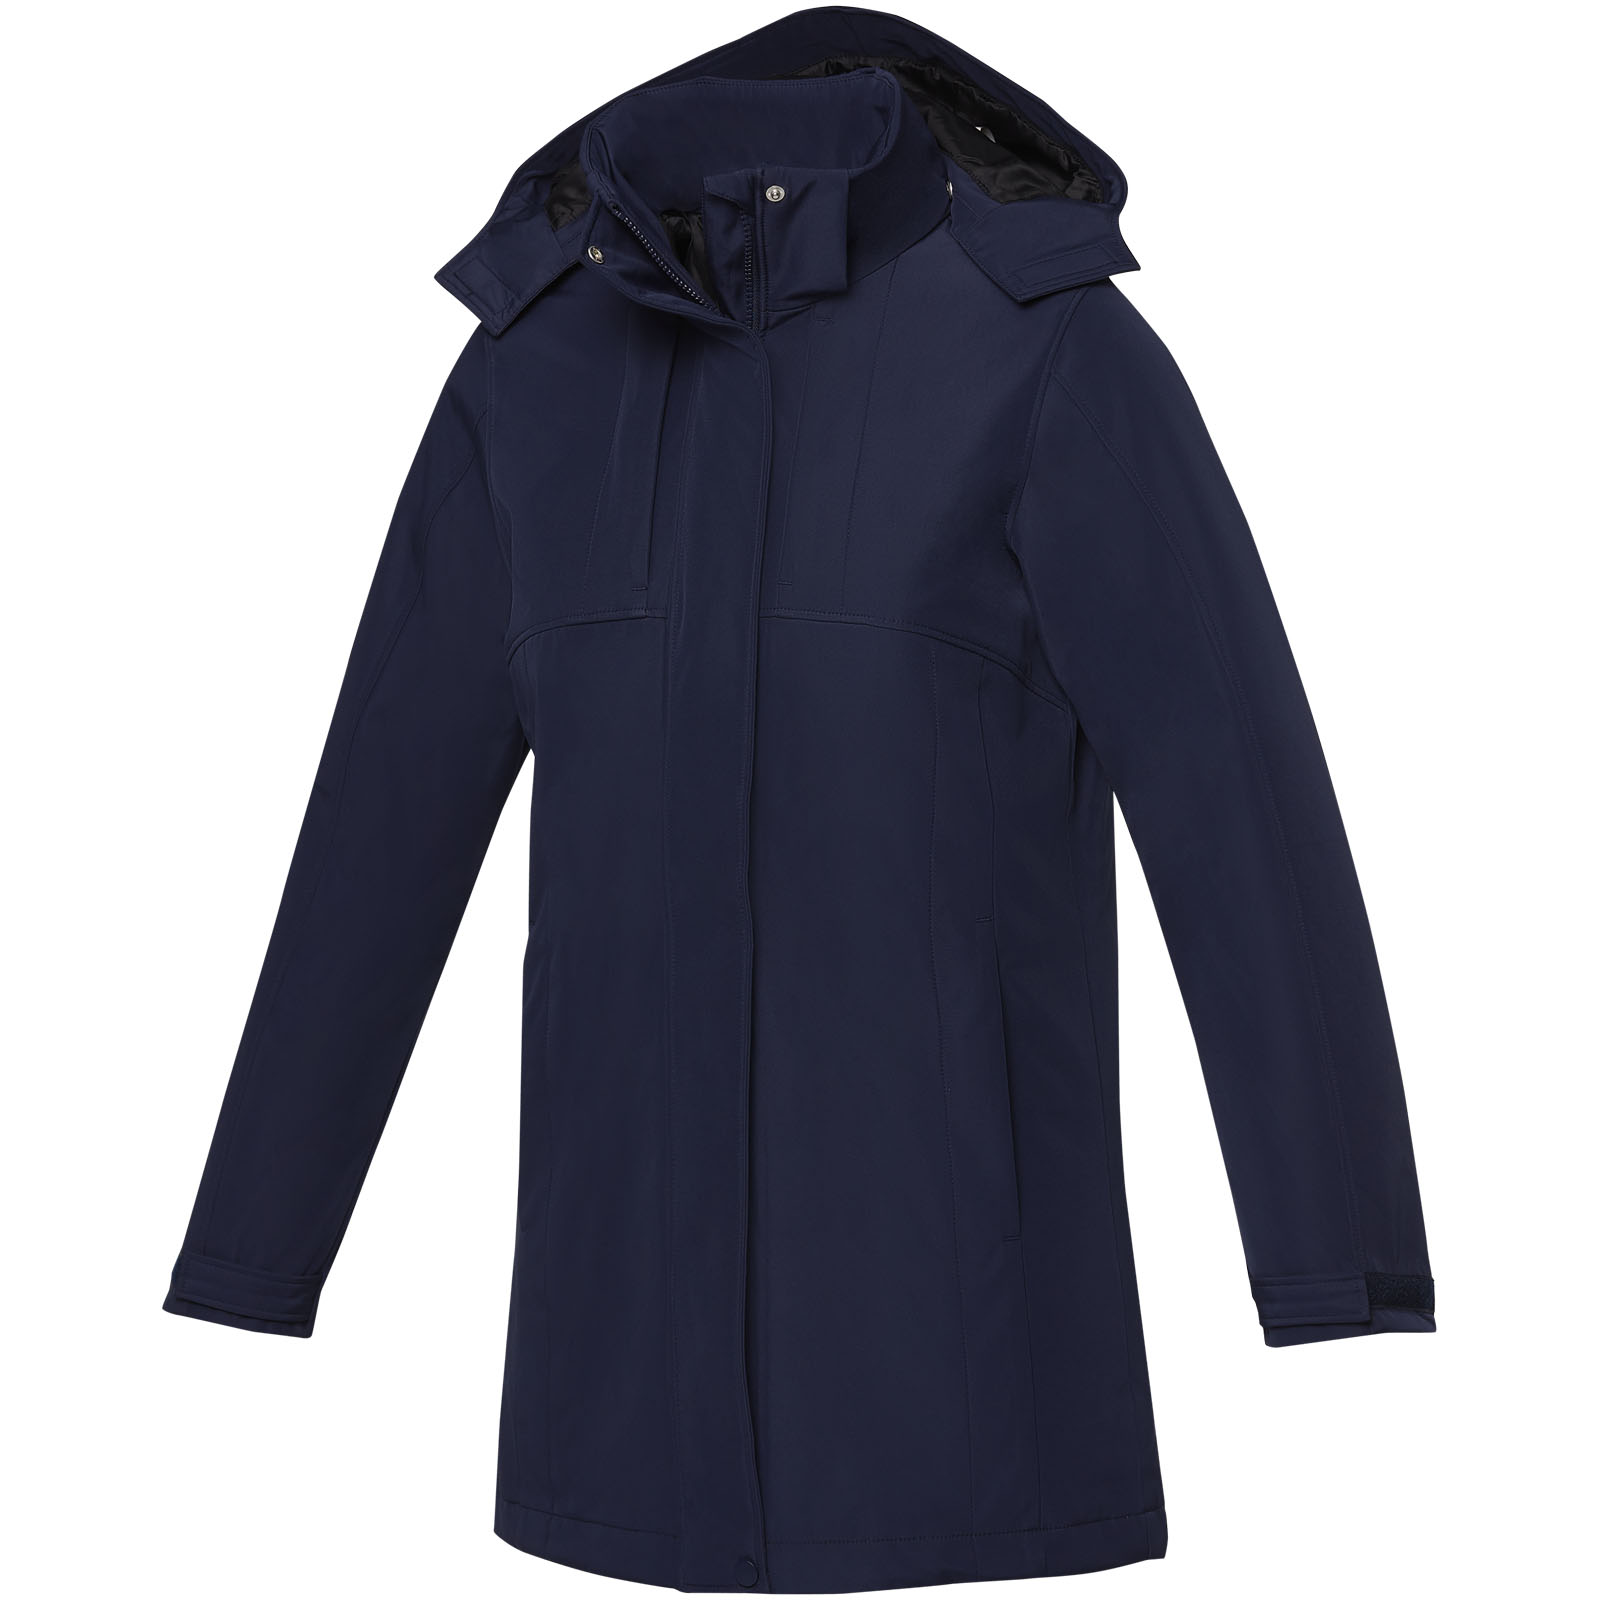 Advertising Jackets - Hardy women's insulated parka